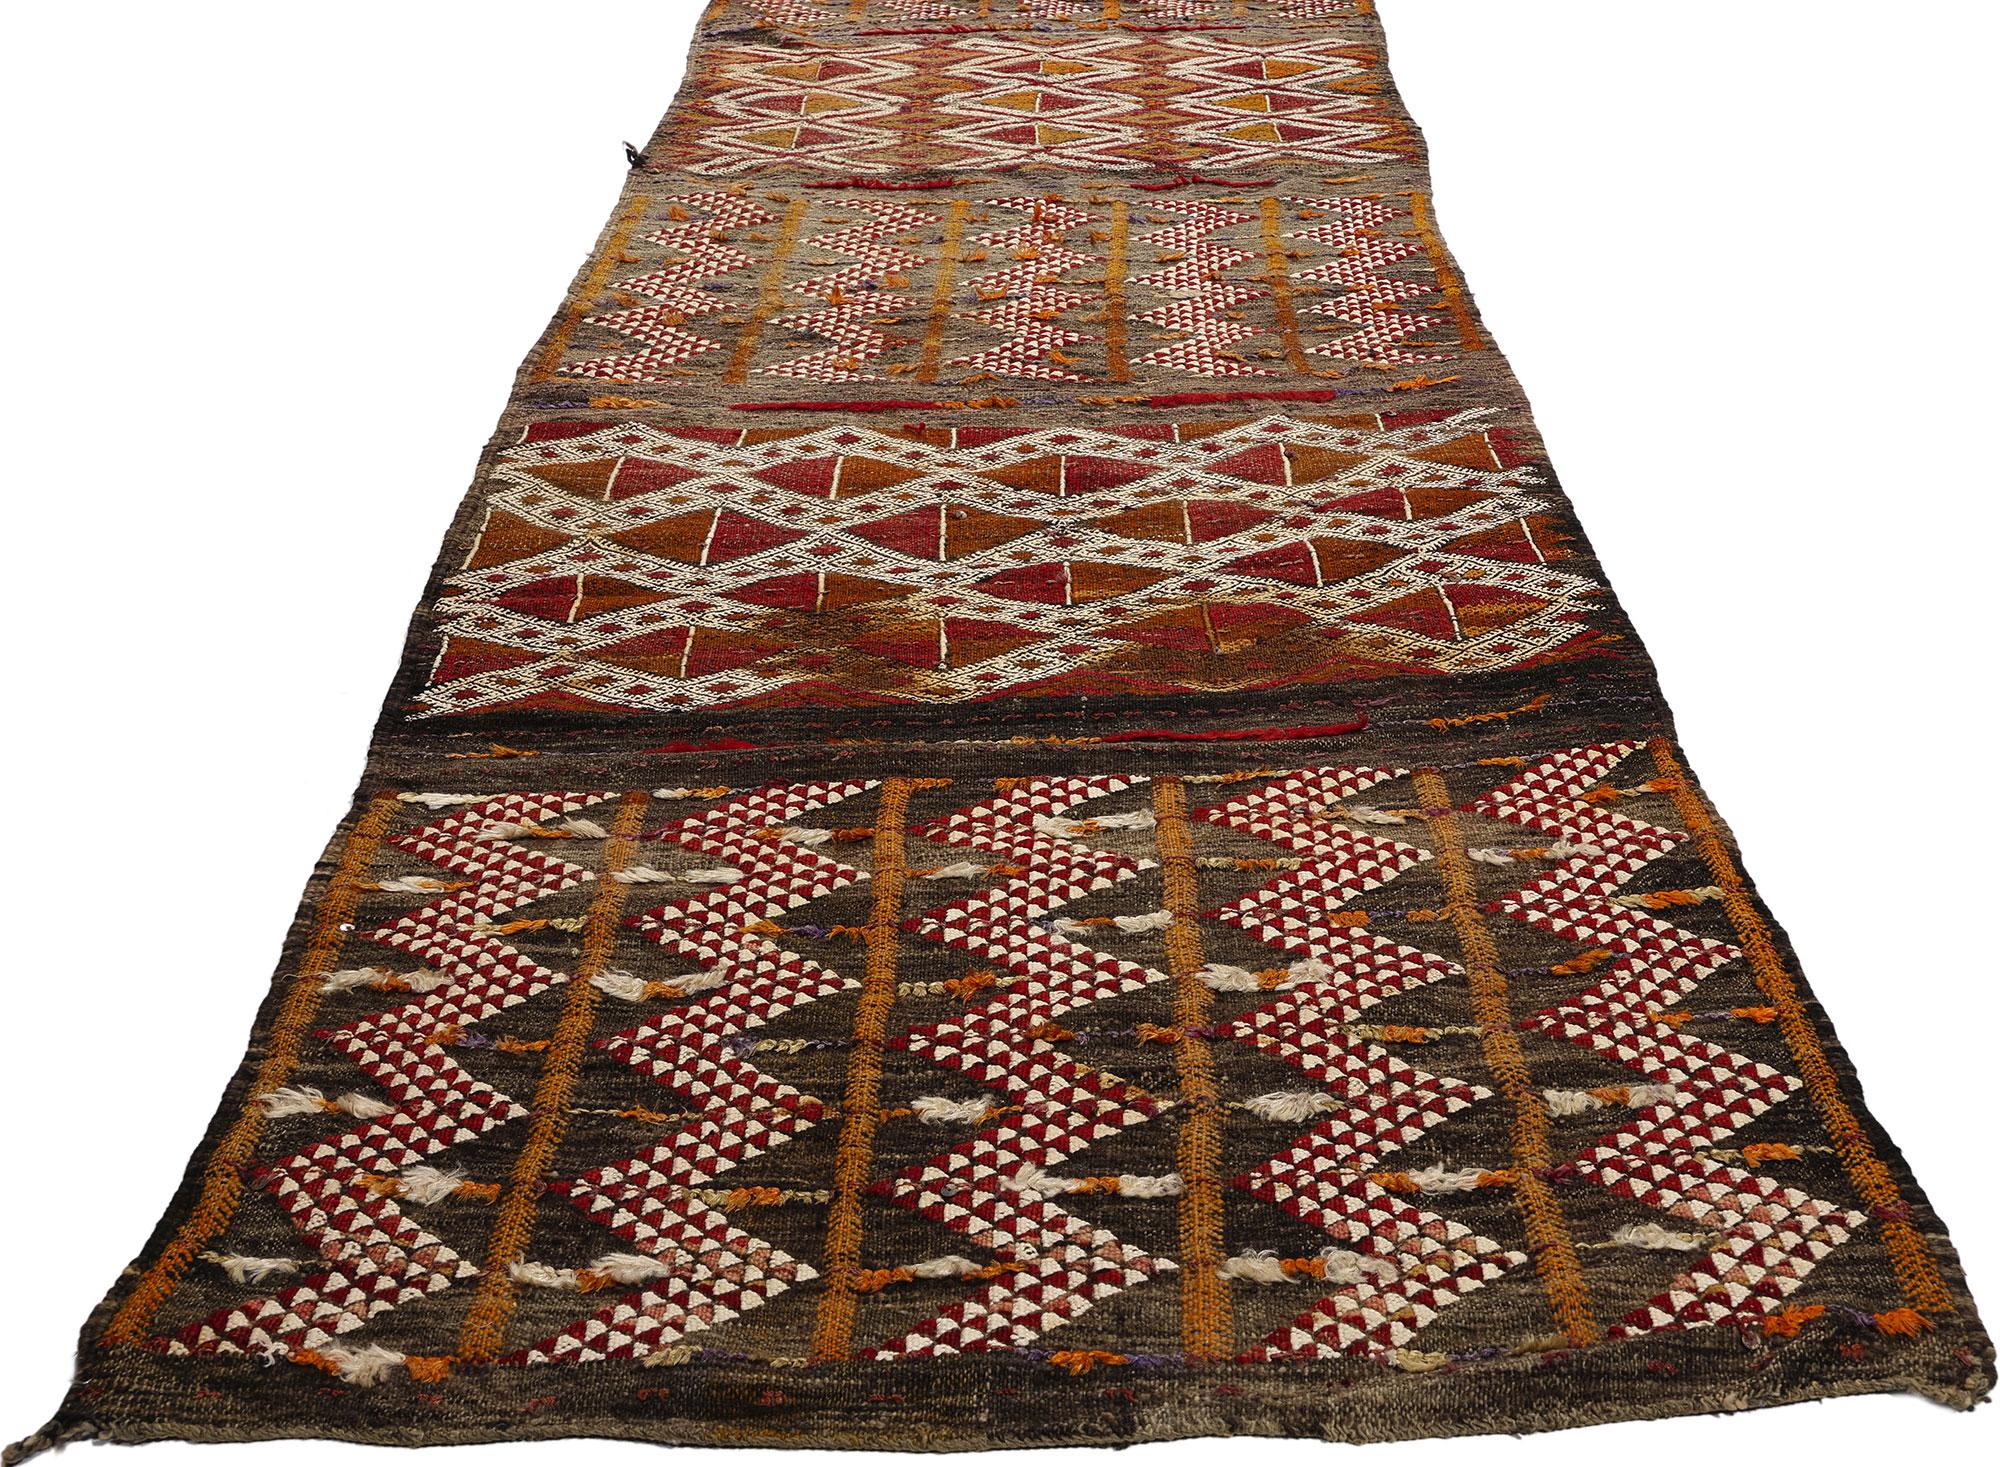 21777 Vintage Moroccan Zemmour Kilim Rug, 02'07 x 23'02. Presenting an exquisite vintage Moroccan kilim rug runner, meticulously handwoven with extra-long dimensions by the skilled artisans of the Zemmour Tribe, nestled in the picturesque Middle